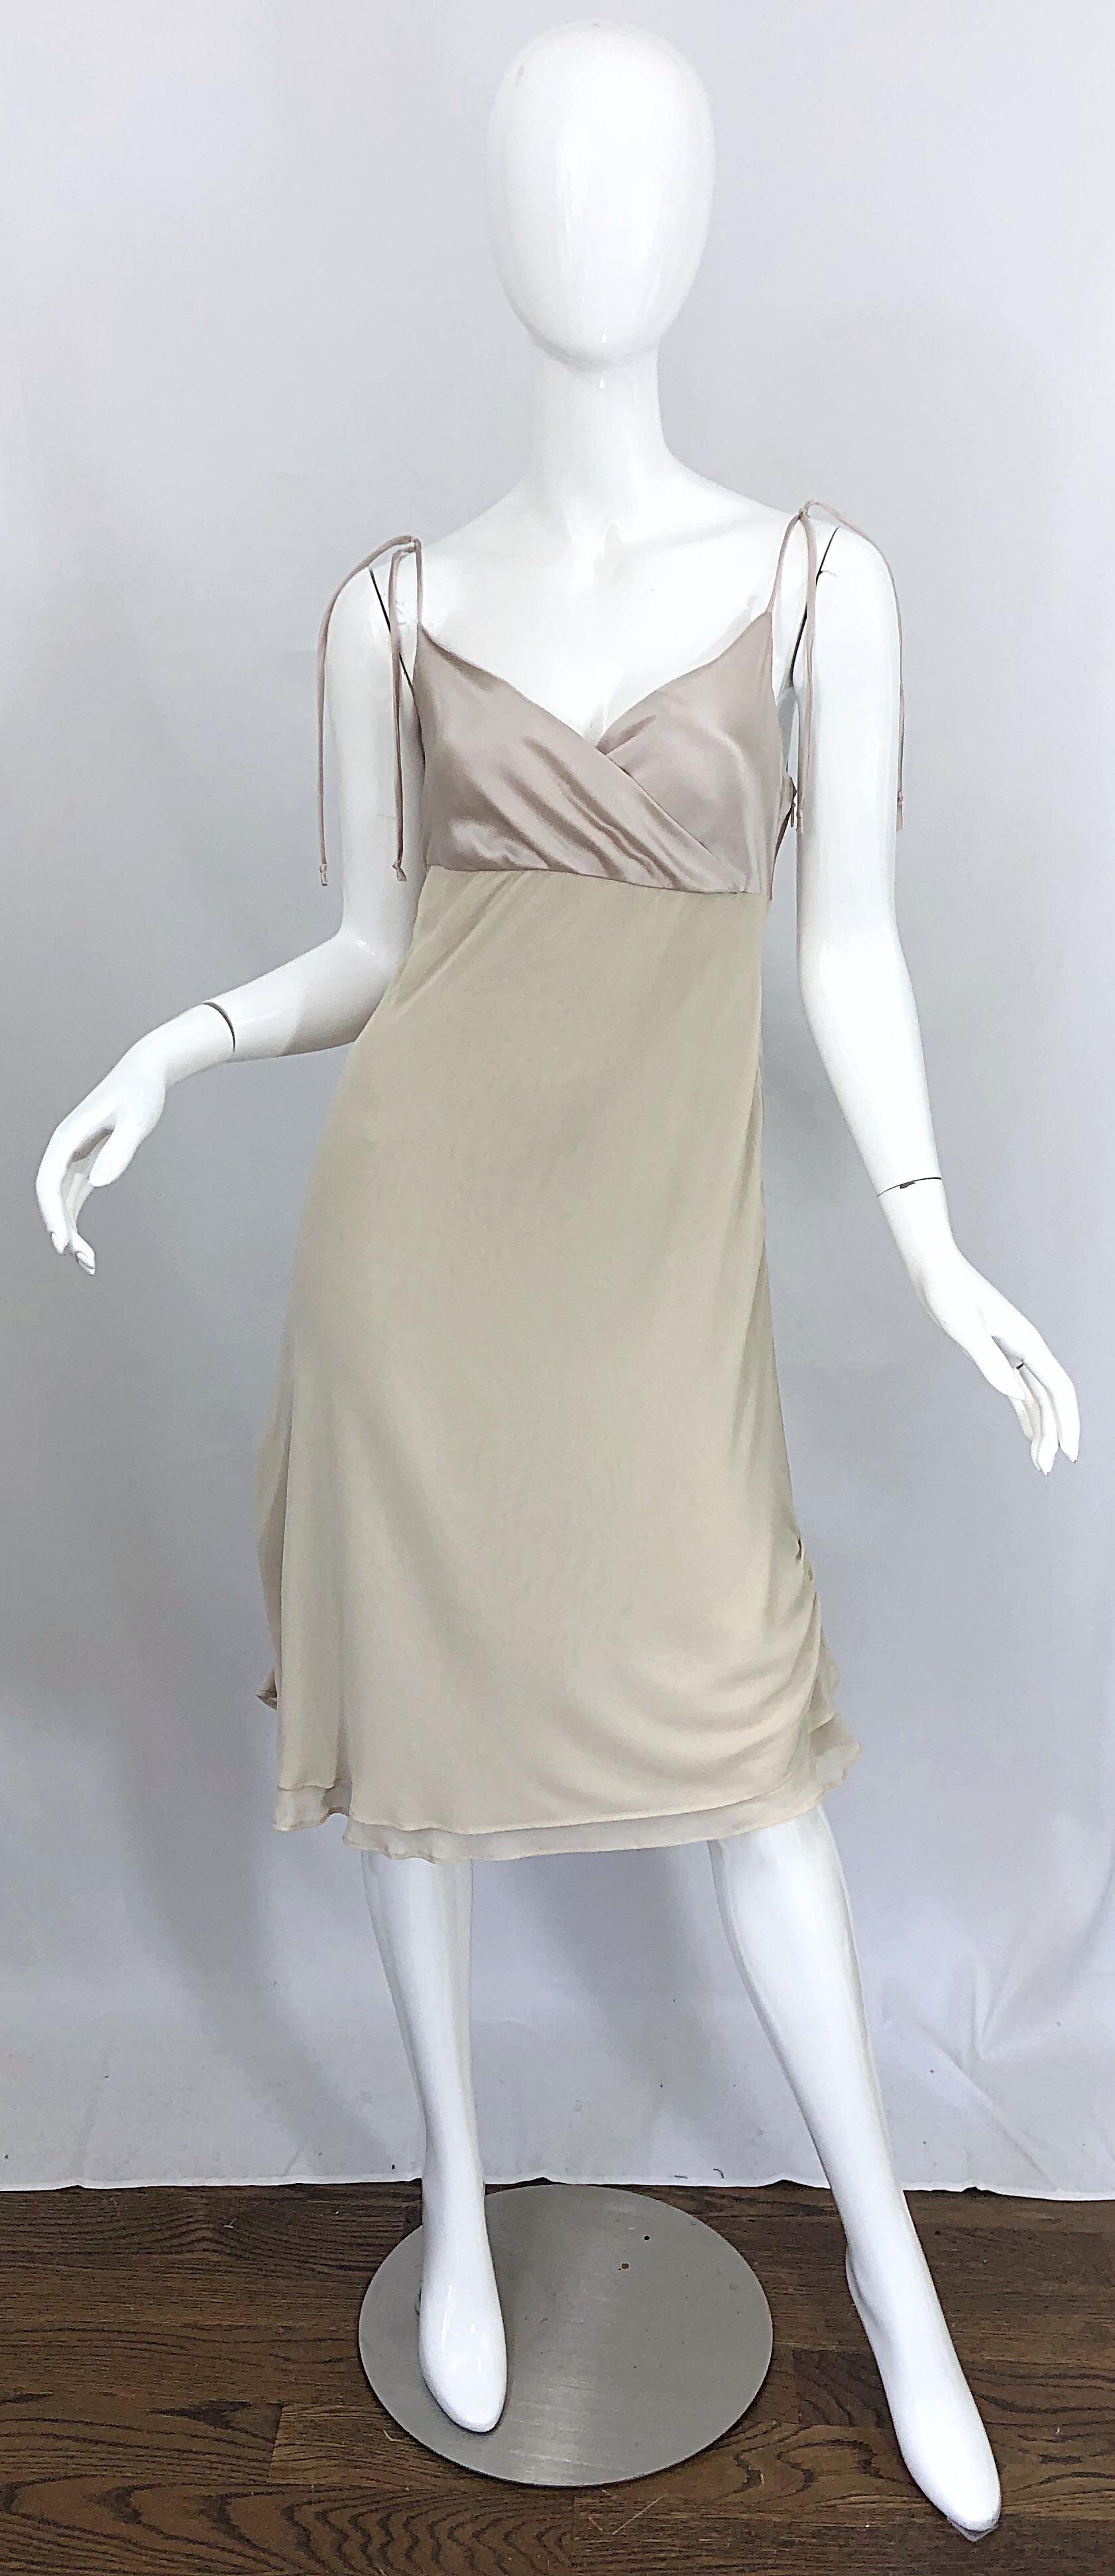 Chic 1990s ALBERTA FERRETTI Size 10 / 12 sleeveless silk and rayon beige dress! Features the perfect beige color that is suitable anytime of year. Adjustable ties at each shoulder to make longer or shorter. Flattering ruching detail at each side of